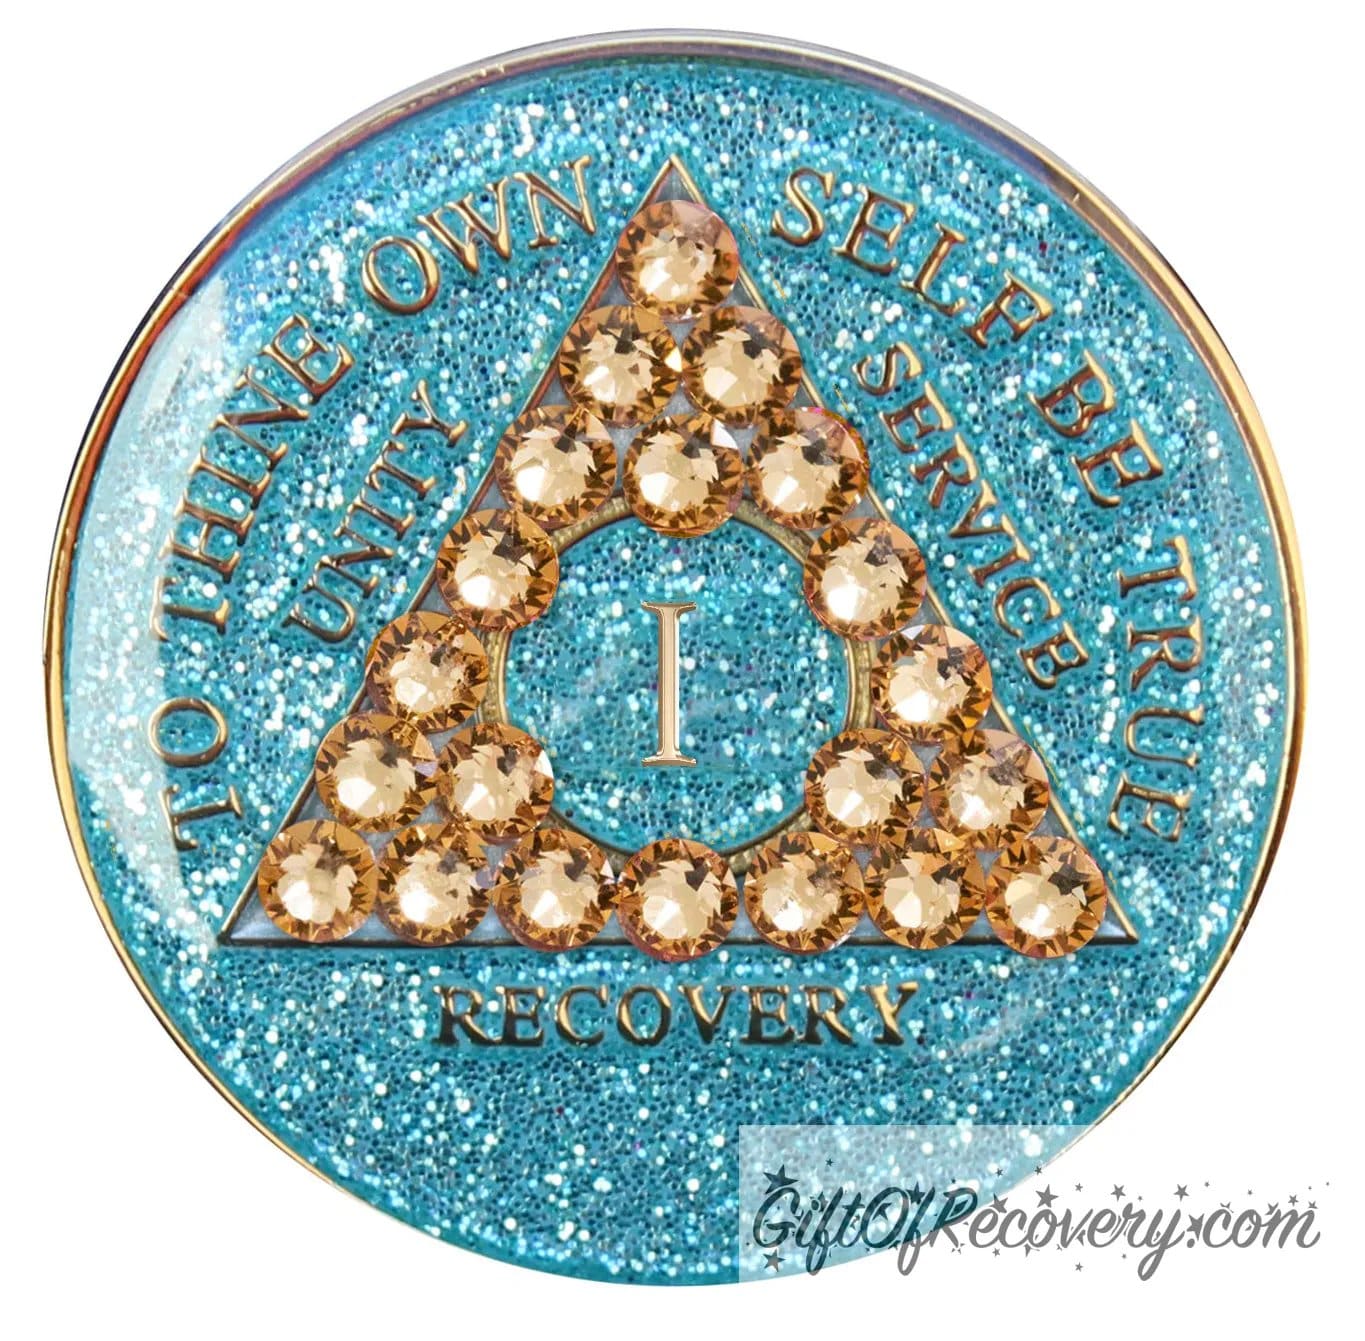 1 year Aqua glitter AA medallion with 21 gold genuine crystal making a triangle in the center, and to thine own self be true, unity, service, recovery, the roman numeral in the center and the rim of the recovery medallion embossed in 14k gold plated brass and sealed with resin for a glossy shine.